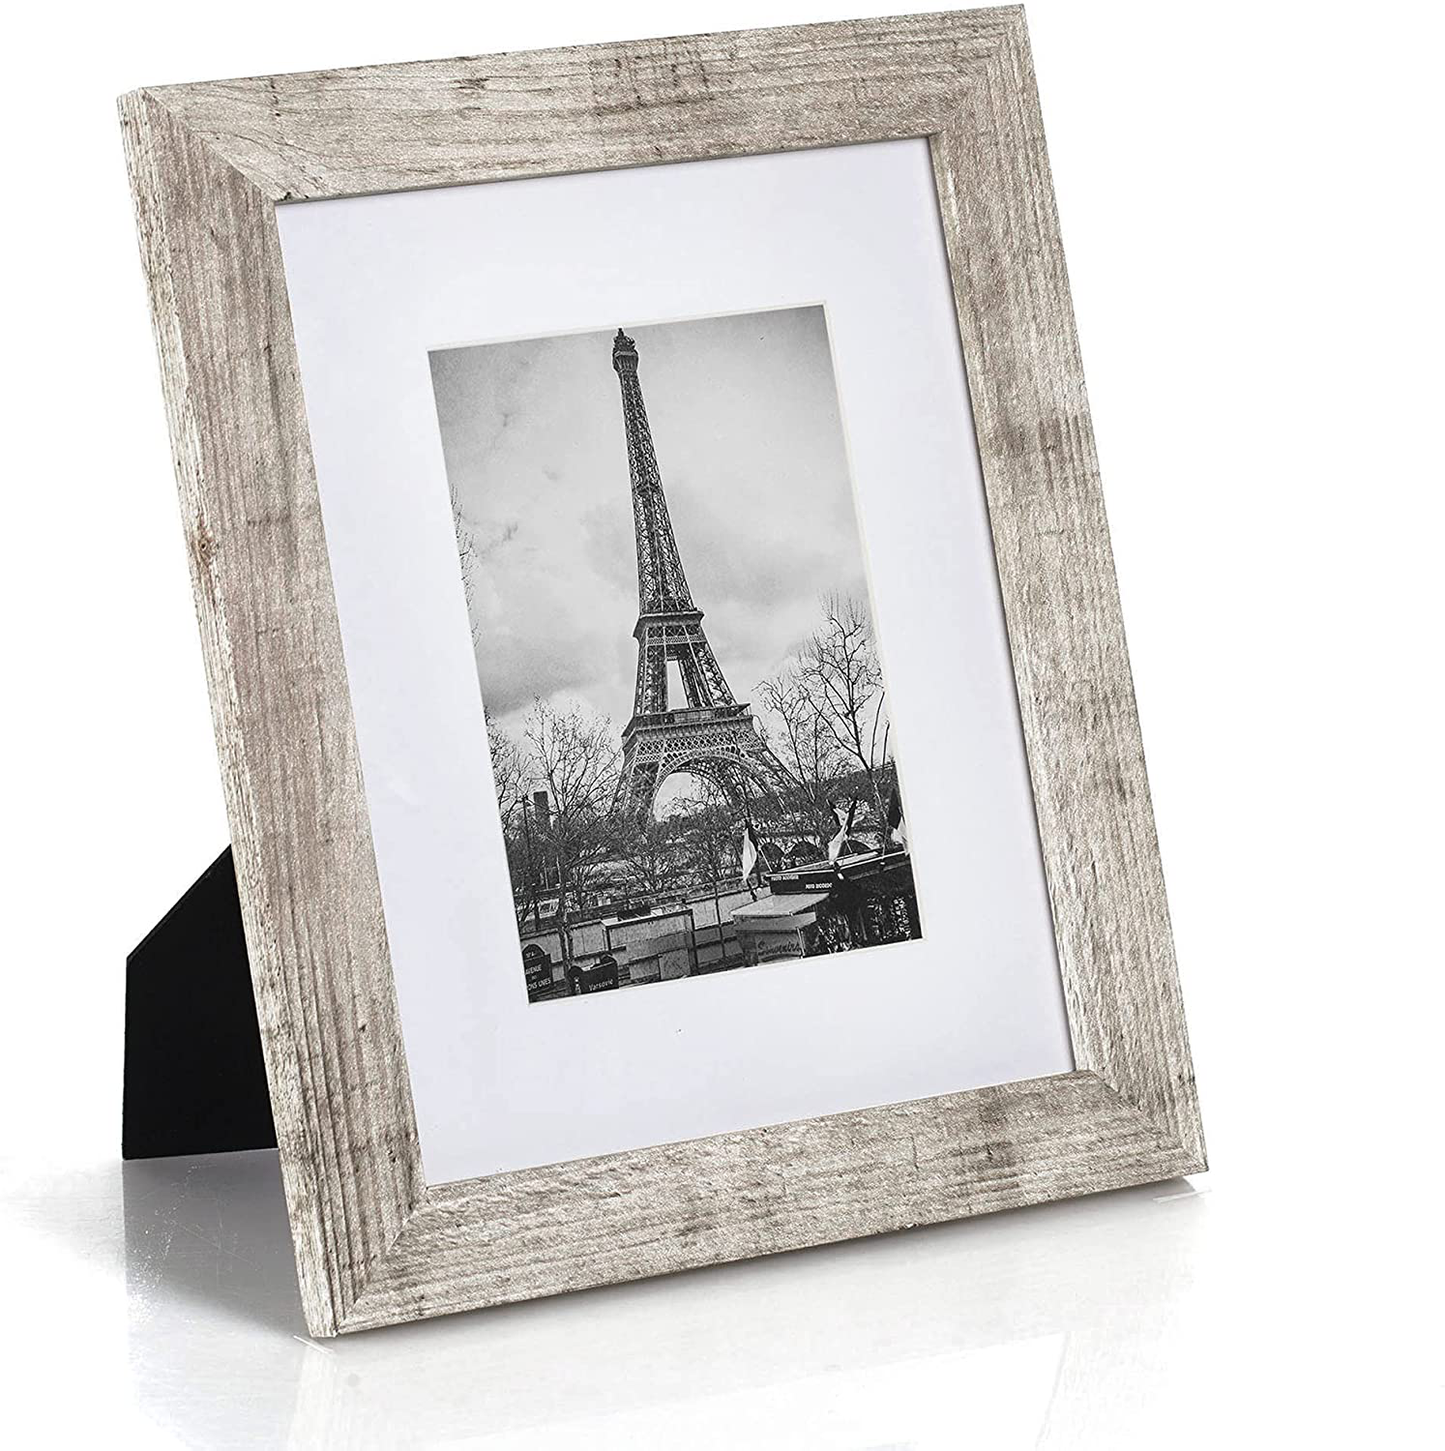 upsimples 8x10 Picture Frame Distressed Burlywood with Real Glass,Display Pictures 5x7 with Mat or 8x10 Without Mat,Multi Photo Frames Collage for Wall or Tabletop Display,Set of 6